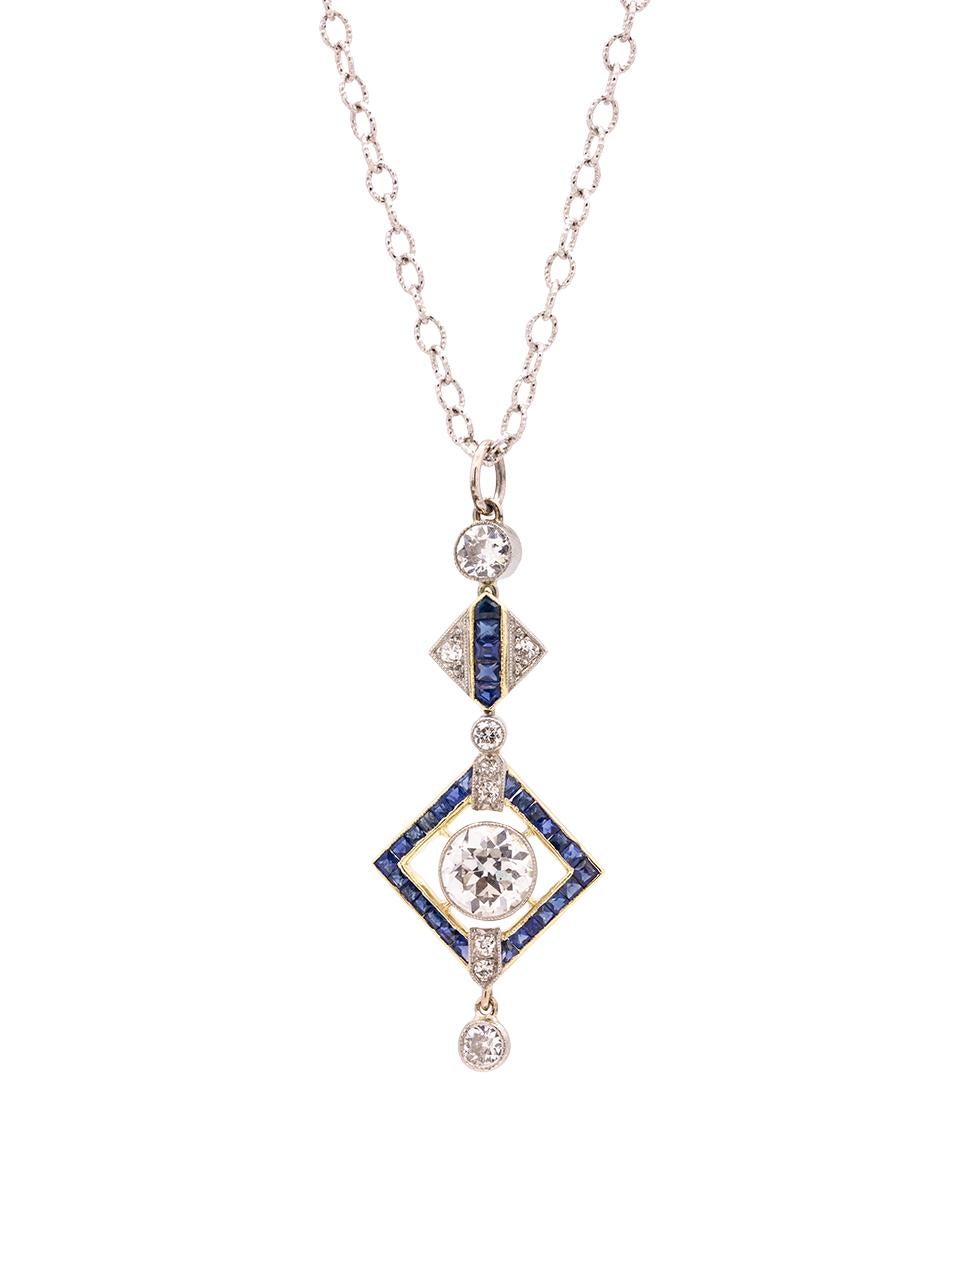 Vintage Art Deco Platinum & 18K WG OEC Diamond Sapphire Necklace 1.20ct circa 19 In Excellent Condition For Sale In West Hollywood, CA